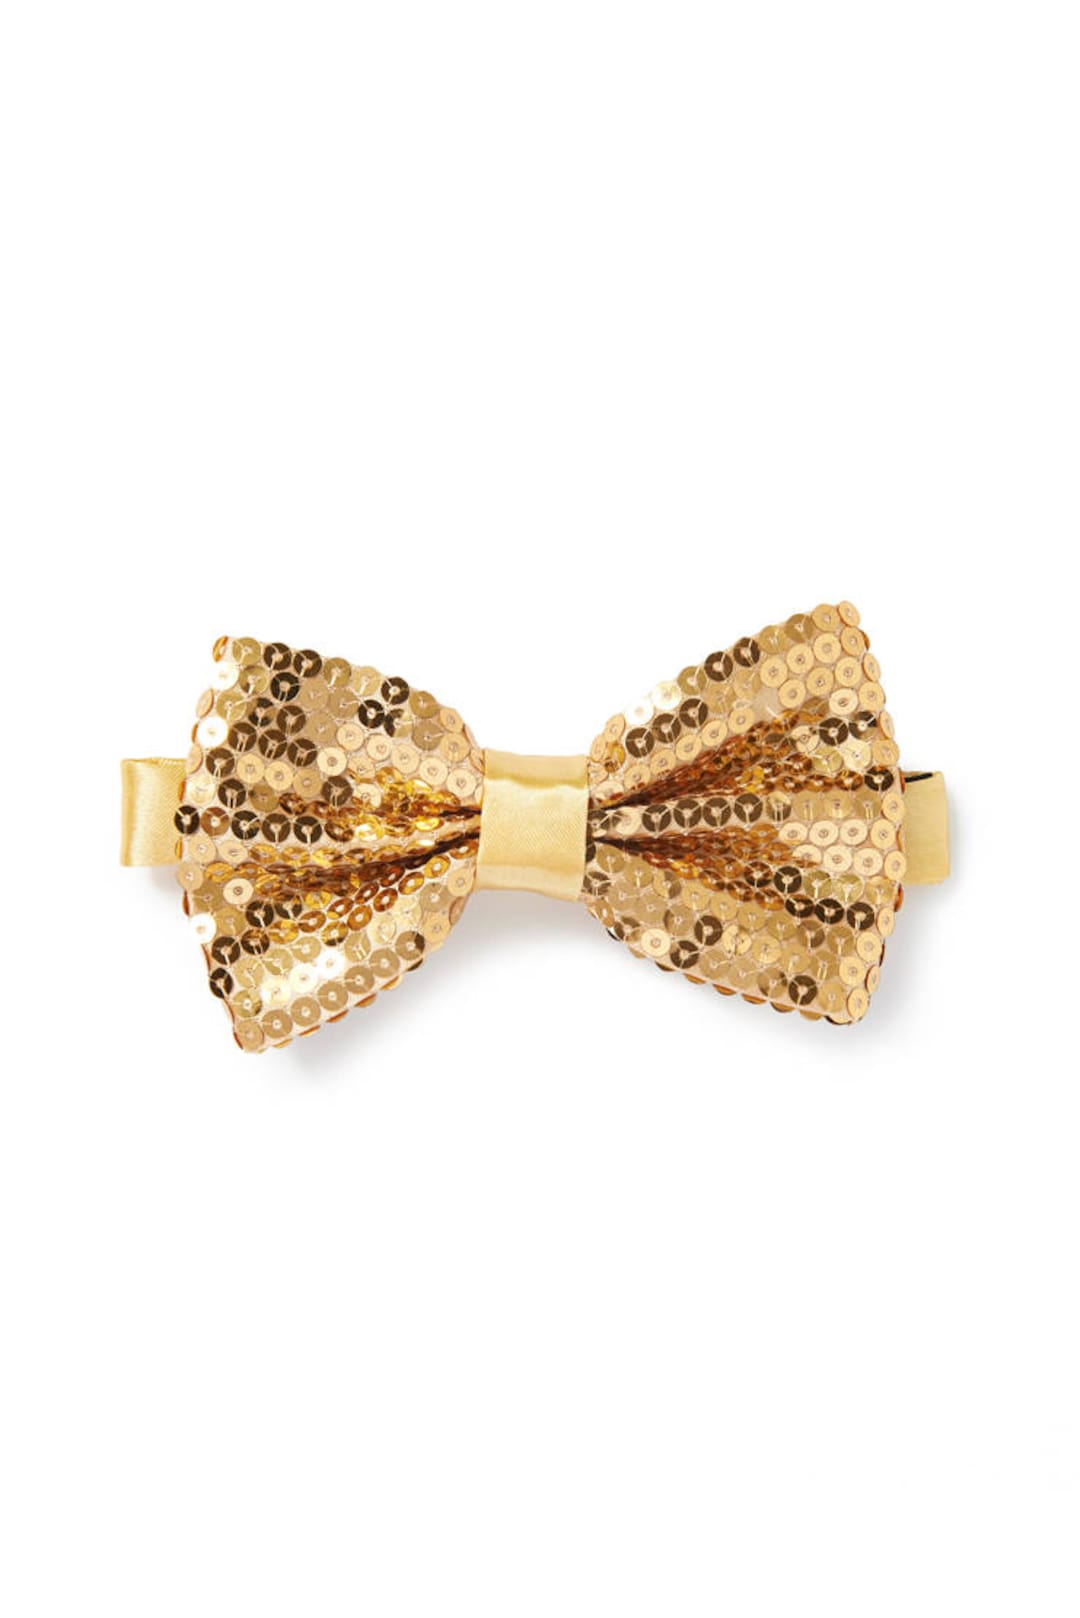 Men's Sequin Bow Tie Champagne Gold - Etsy